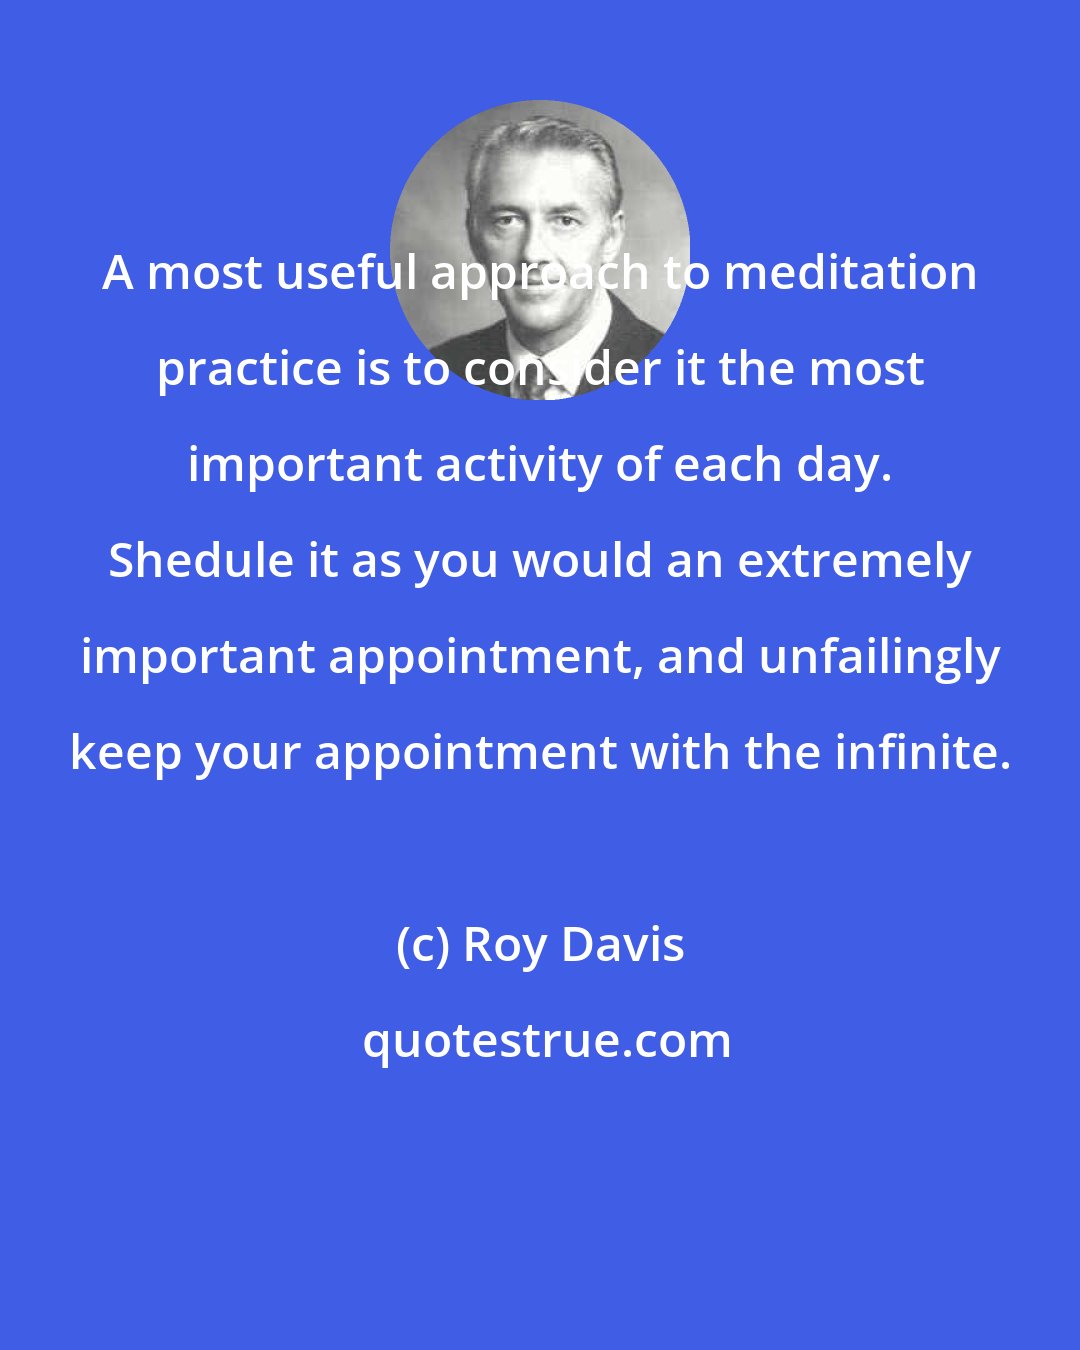 Roy Davis: A most useful approach to meditation practice is to consider it the most important activity of each day. Shedule it as you would an extremely important appointment, and unfailingly keep your appointment with the infinite.